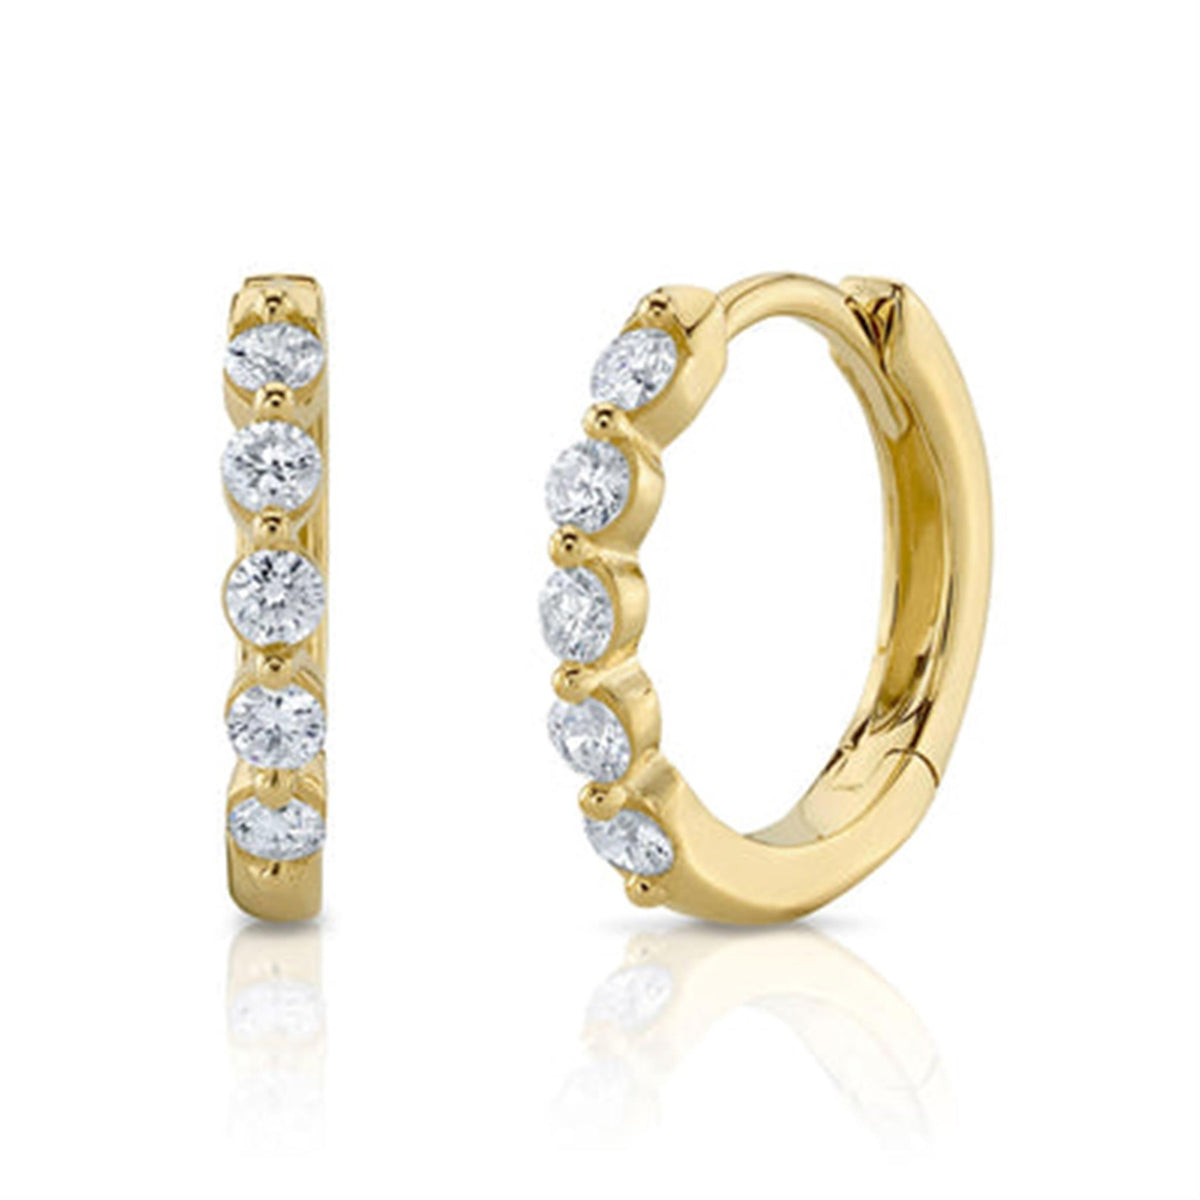 Shy Creation 14Kt Yellow Gold Hoop Earrings With .24cttw Natural Diamonds